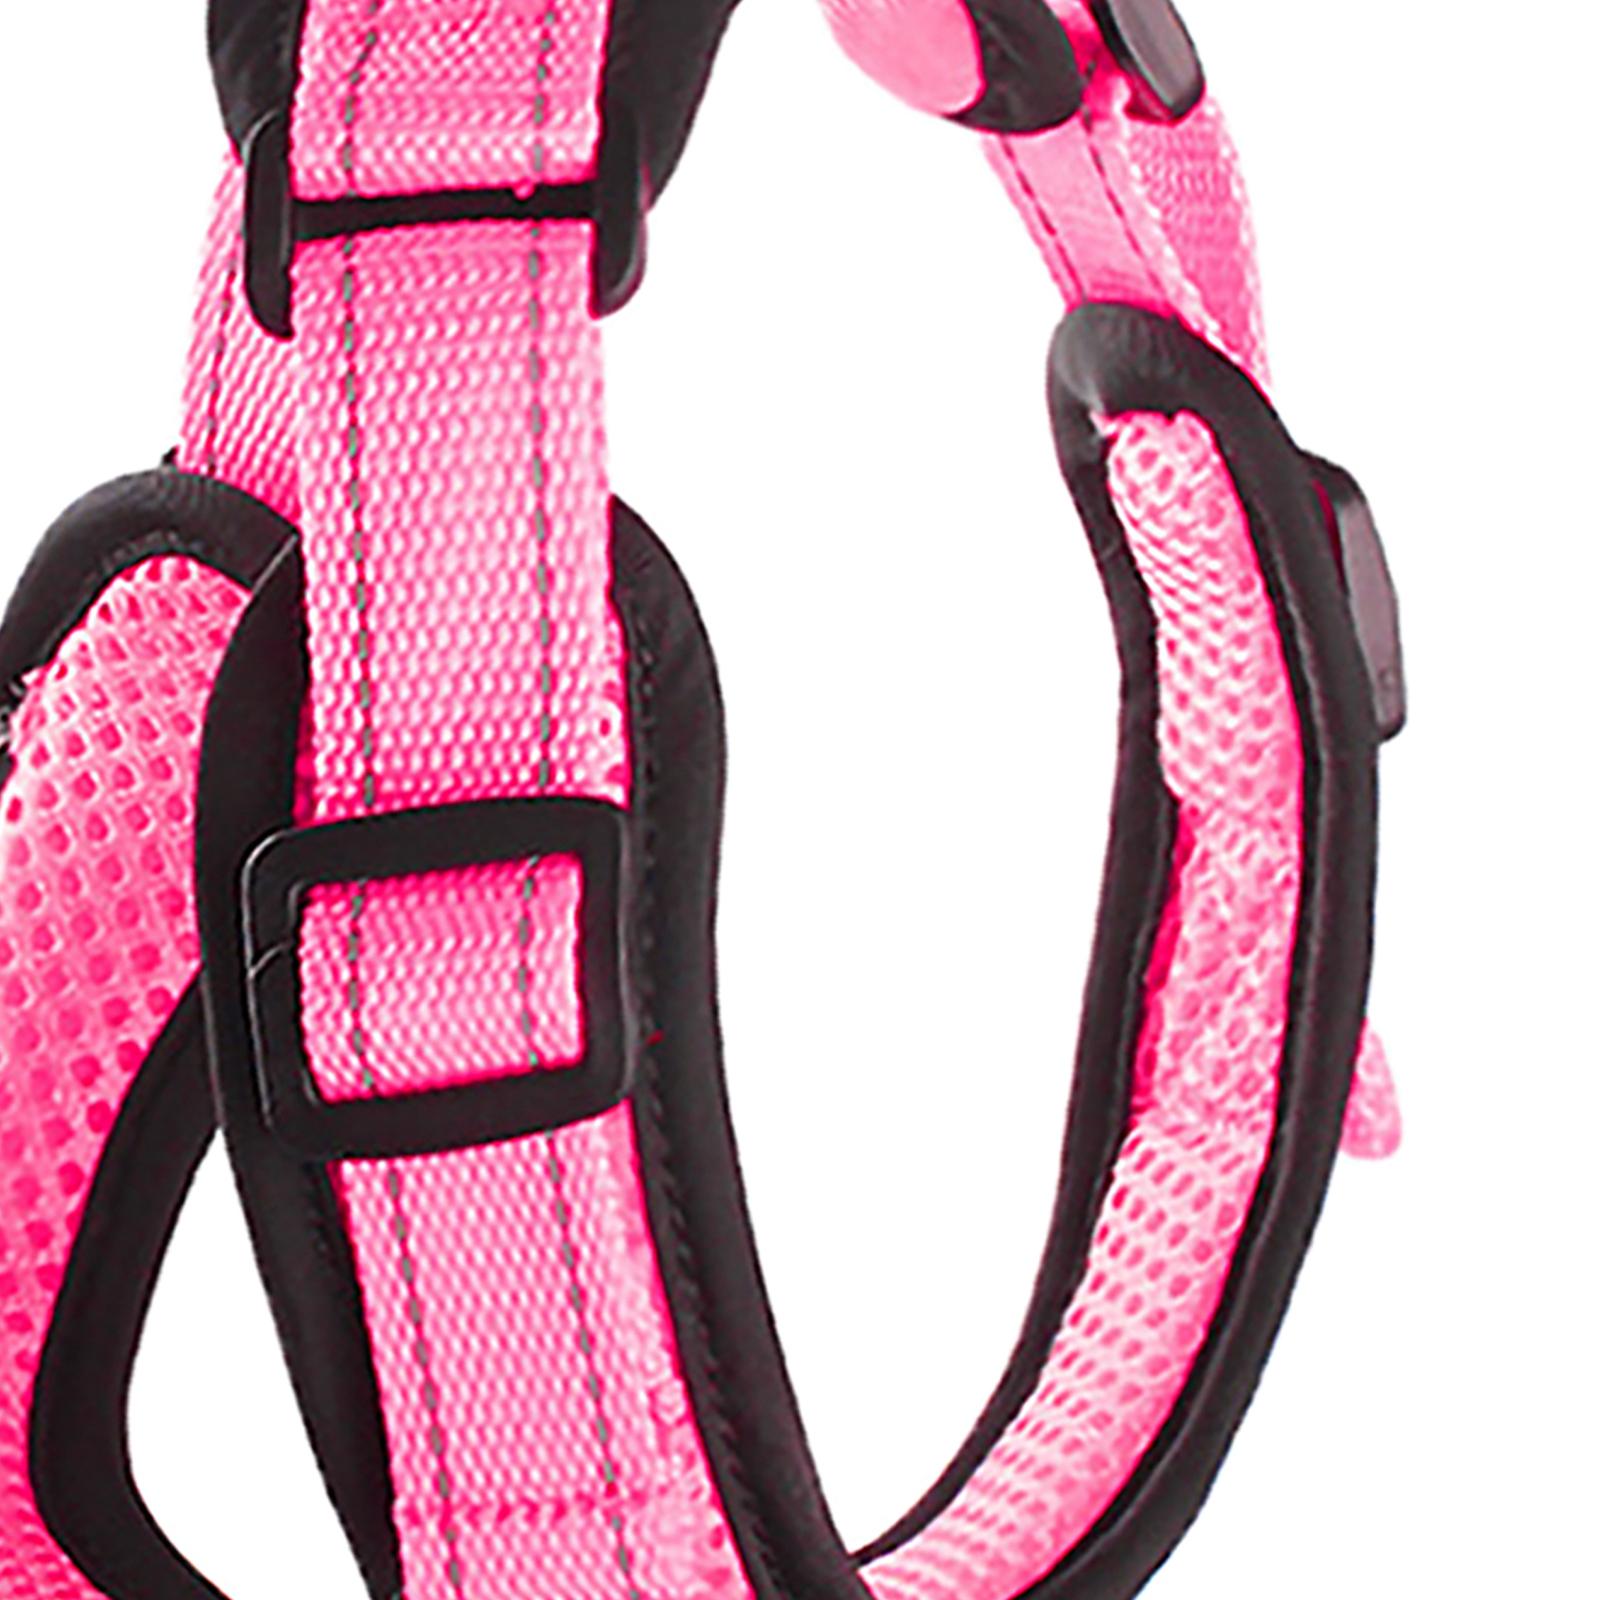 Reflective Dog Harness No Pull Vest Rope for Running Outdoor Lead Walking Pink L